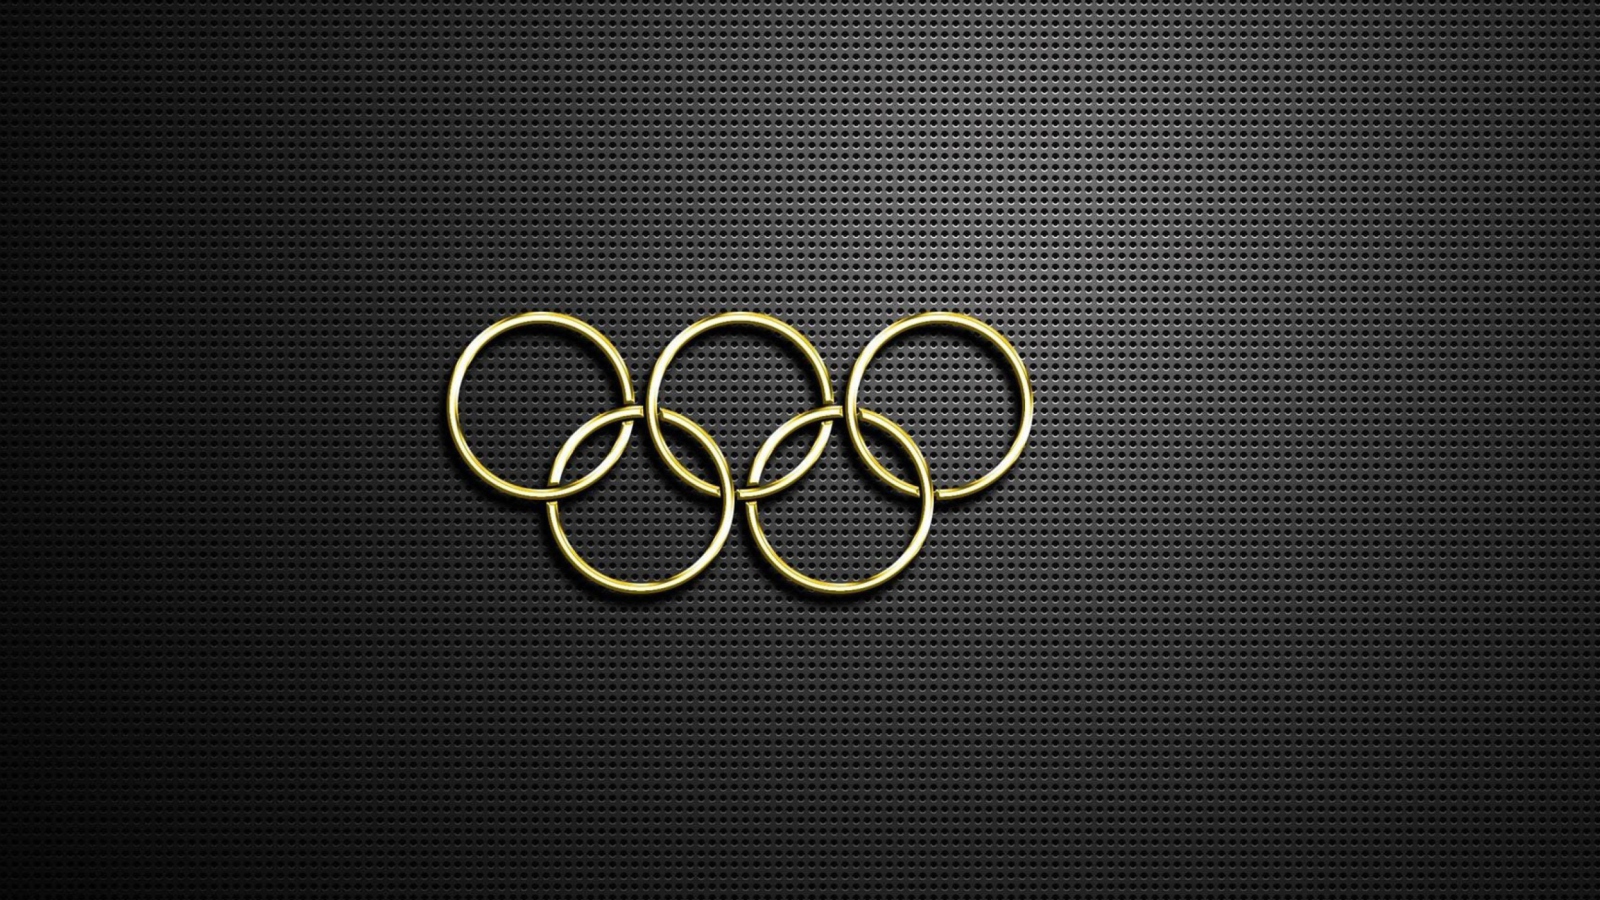 Olympic Games wallpaper 1600x900